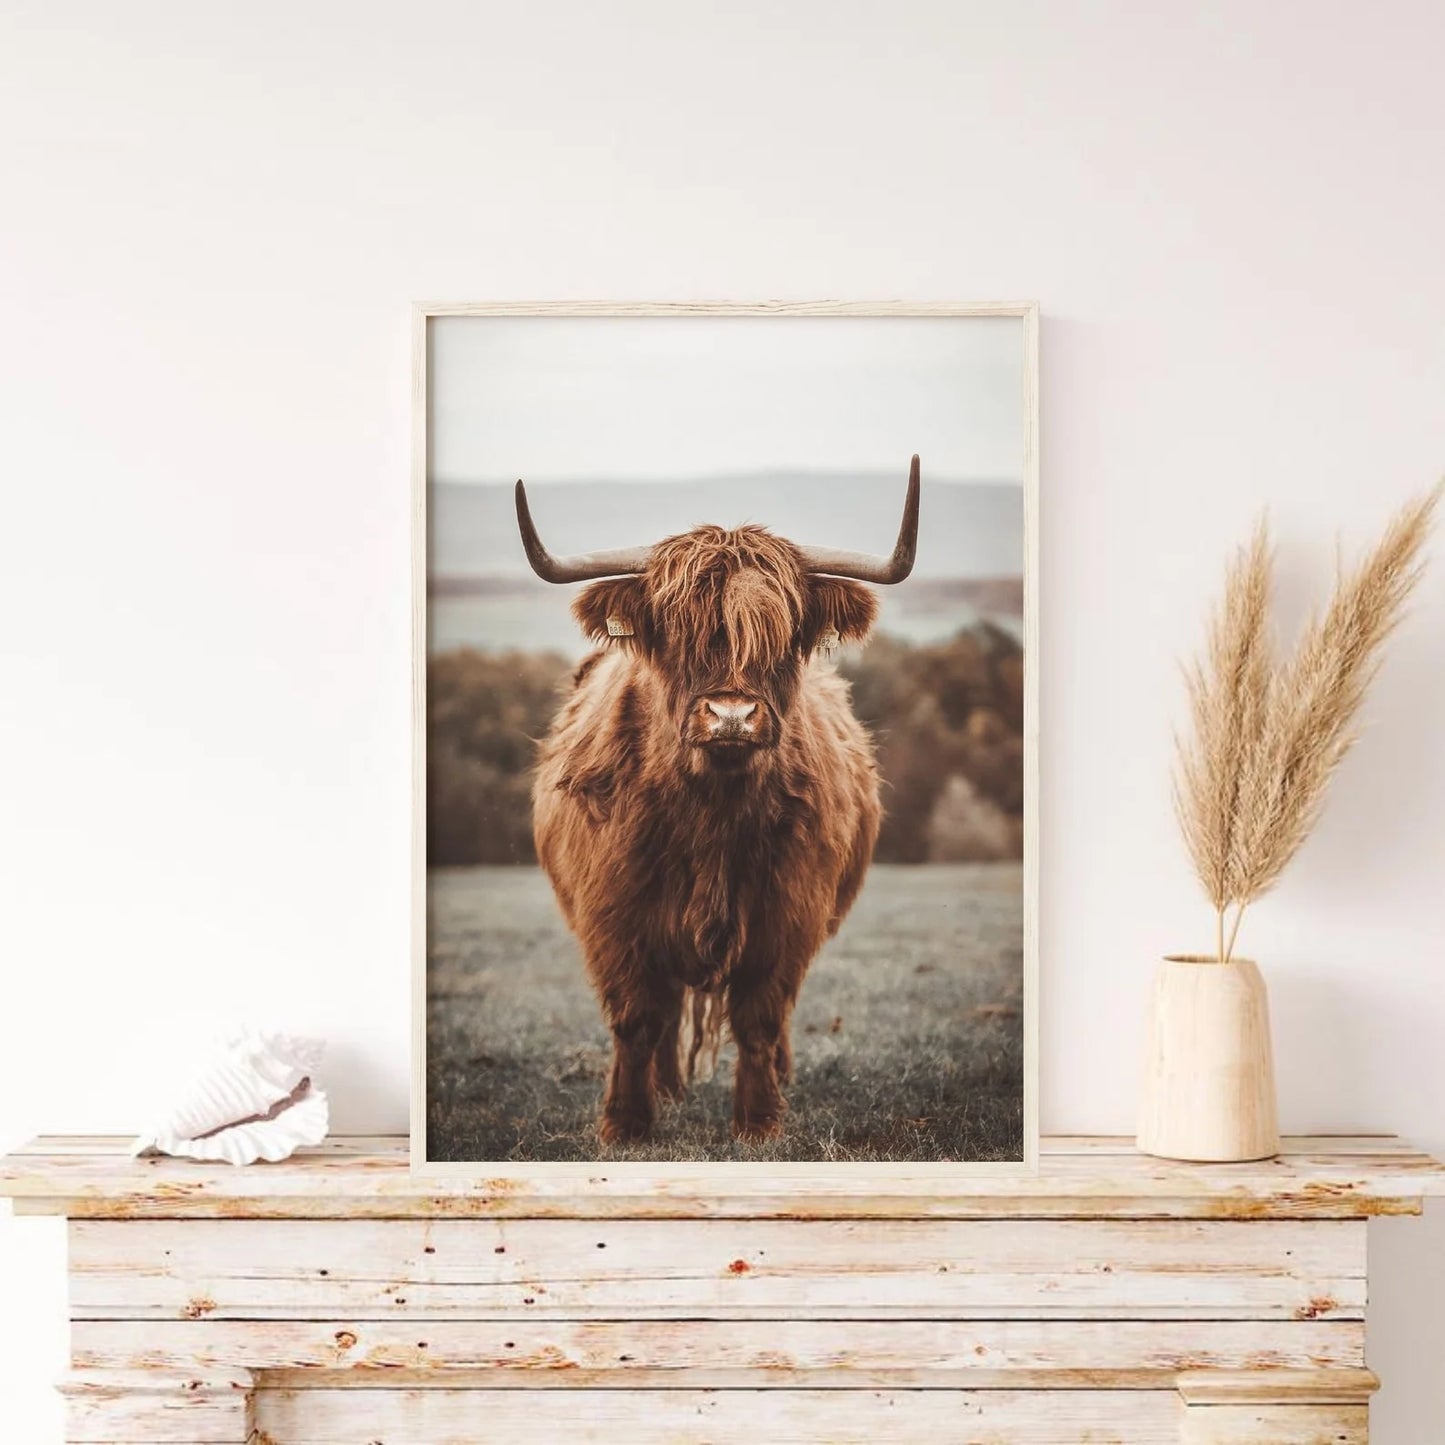 Highland Cow Art Nature Photography Print Poster